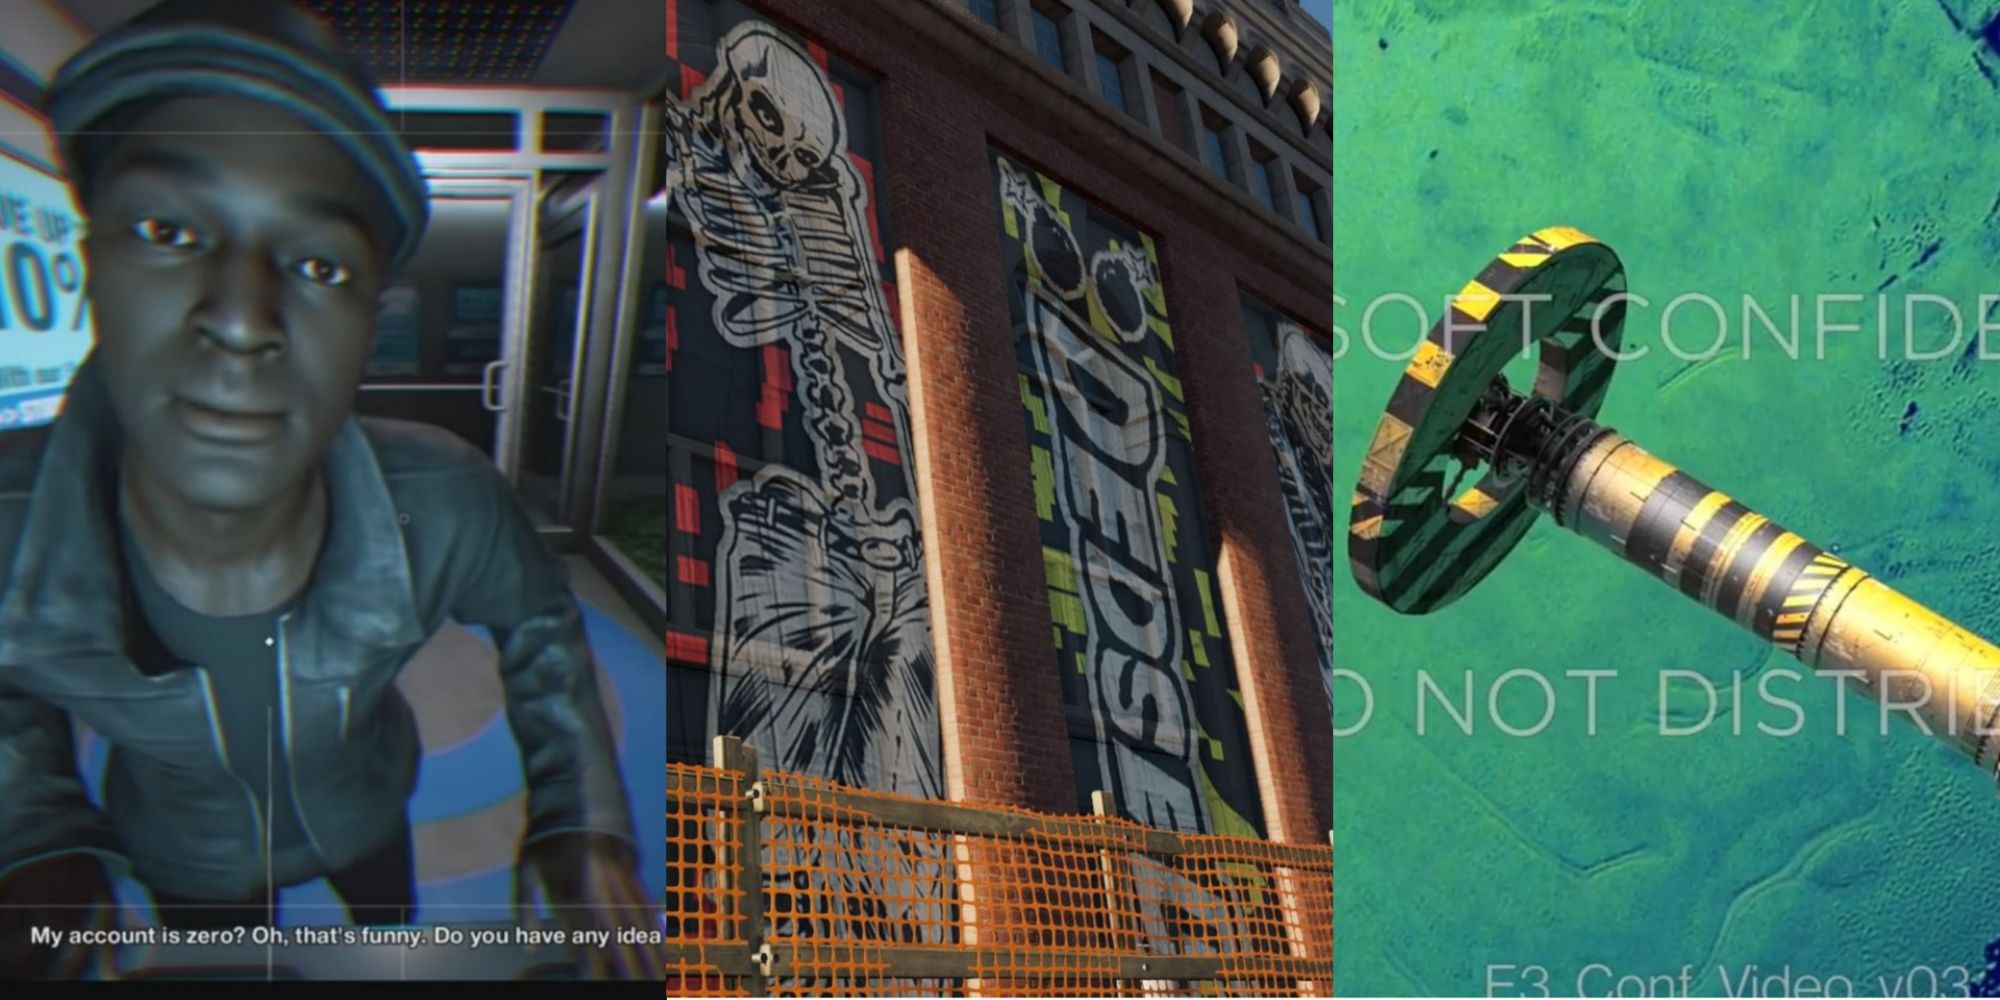 Watch Dogs 2 Split image with a man, painted wall, and space station